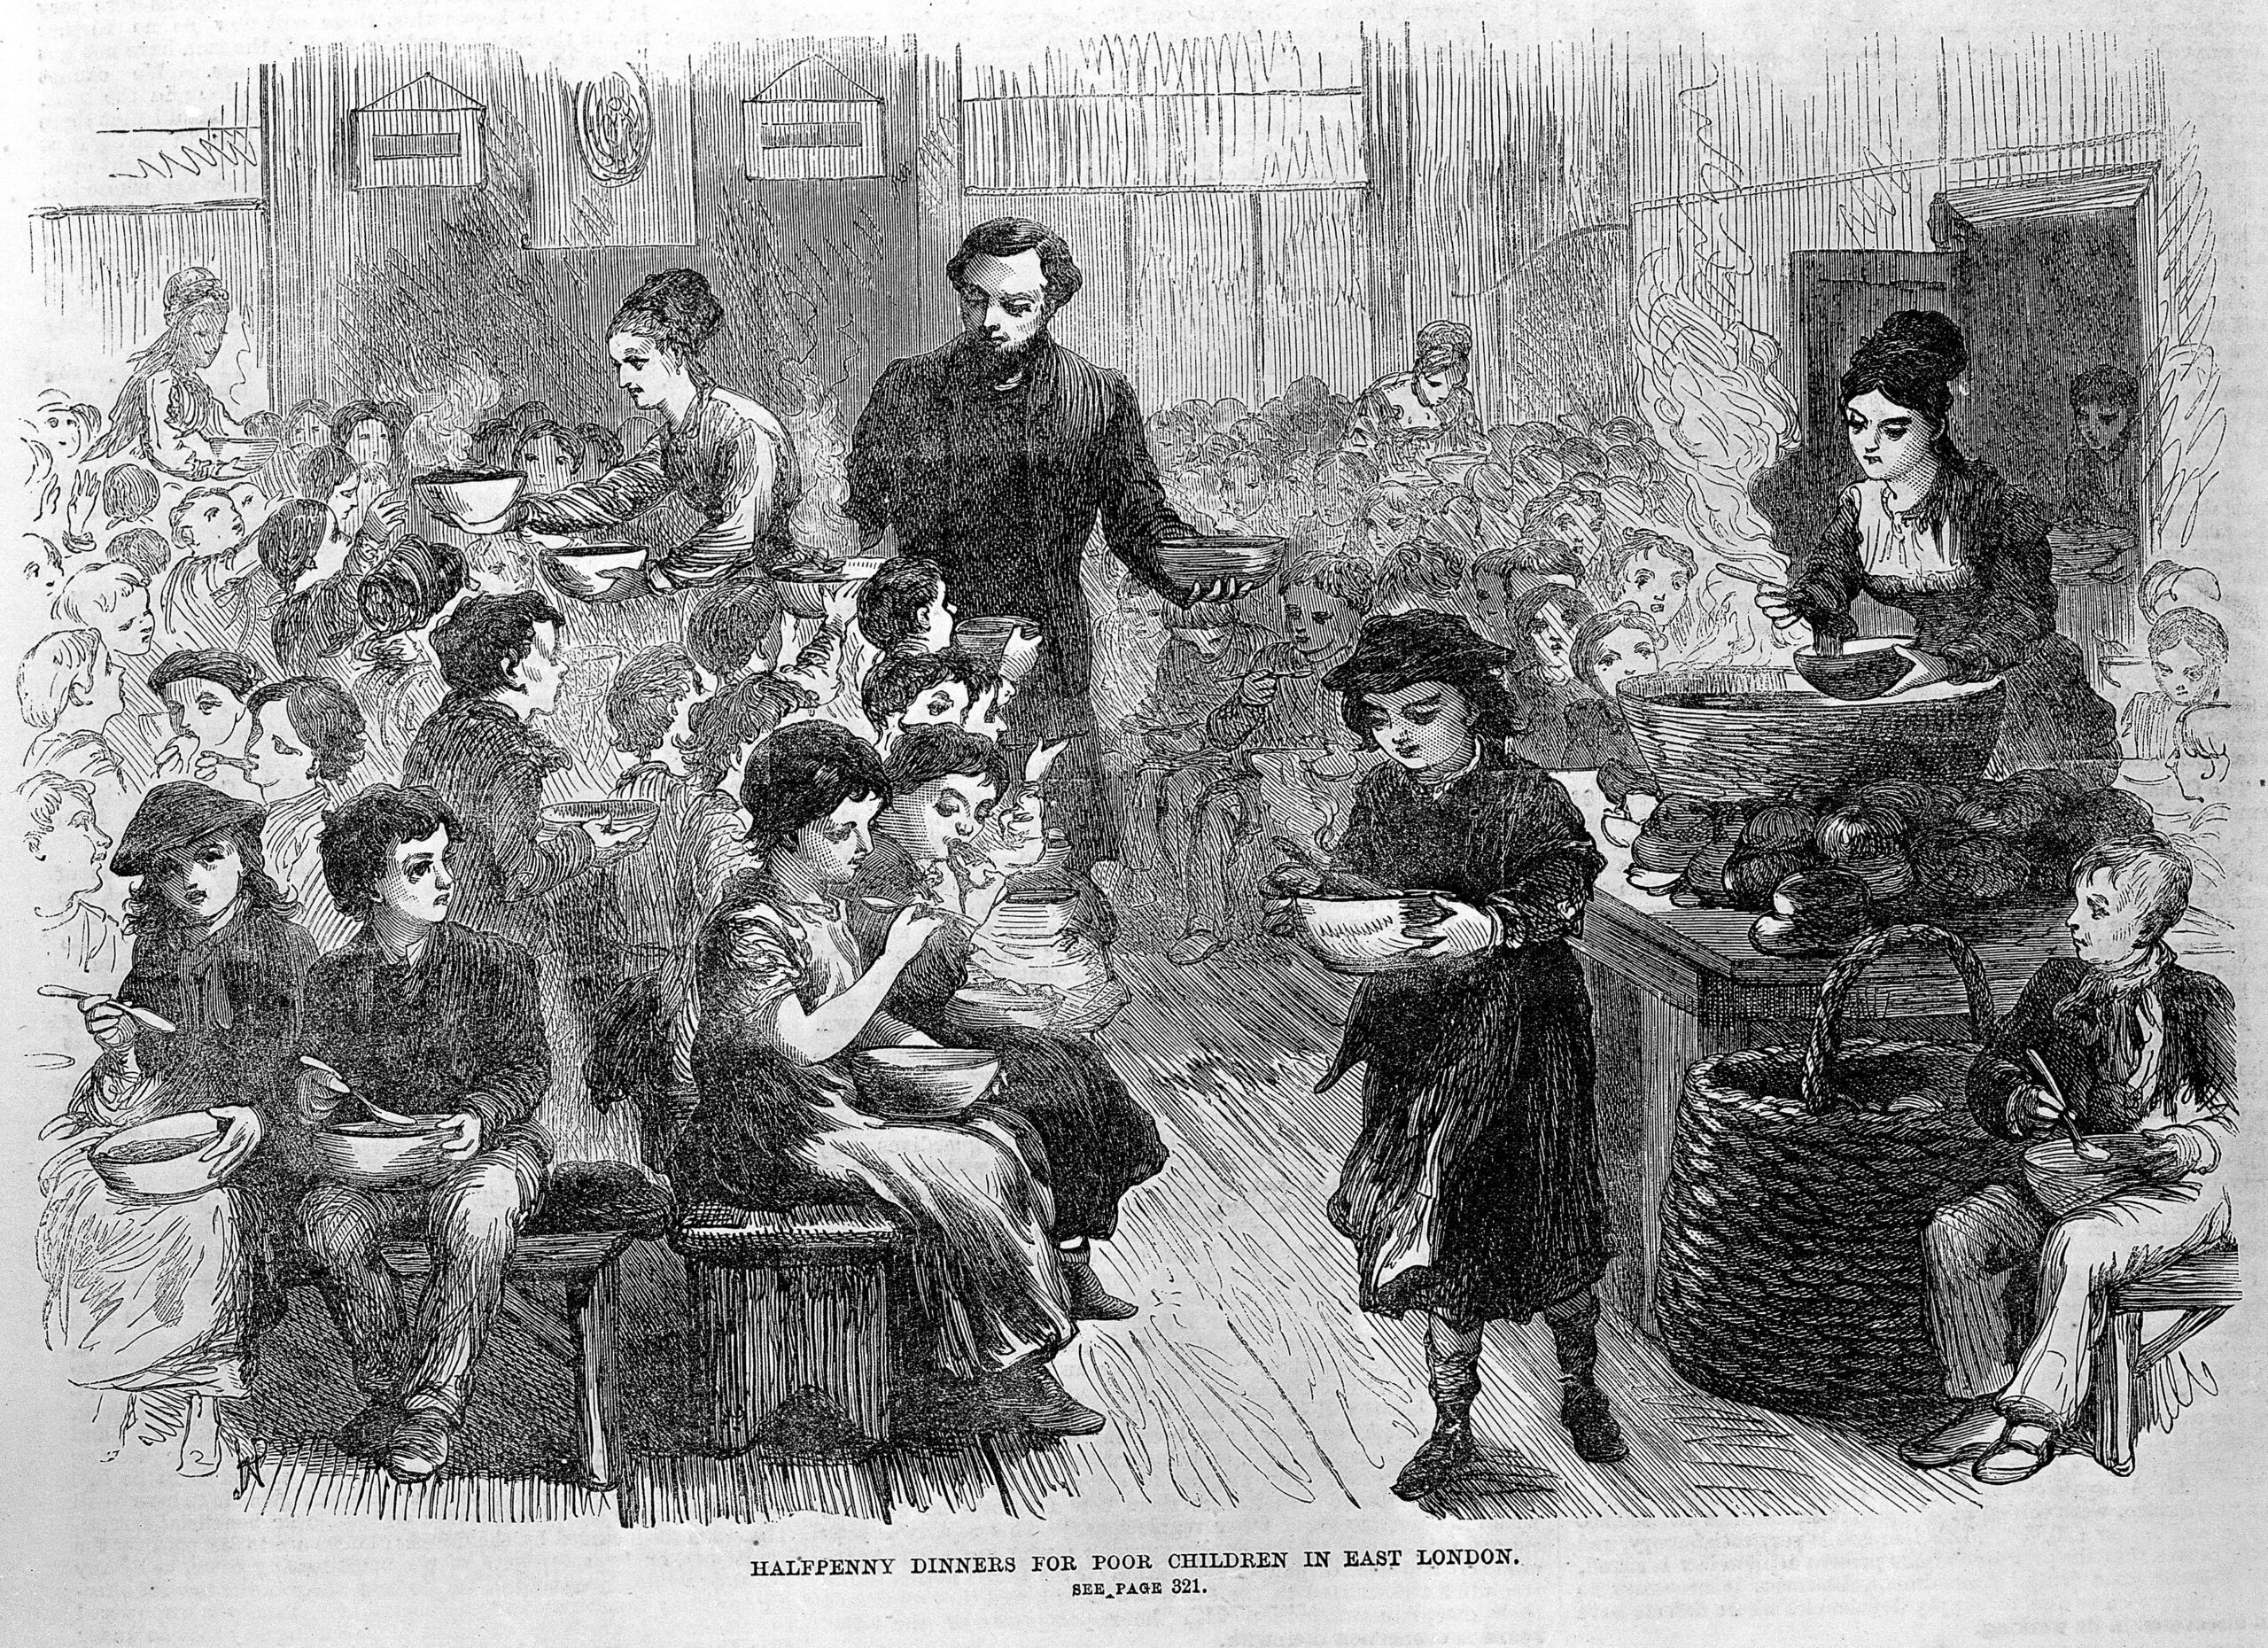 Illustration of poor children receiving dinner from a charity. They are crowded around tables with their bowls.